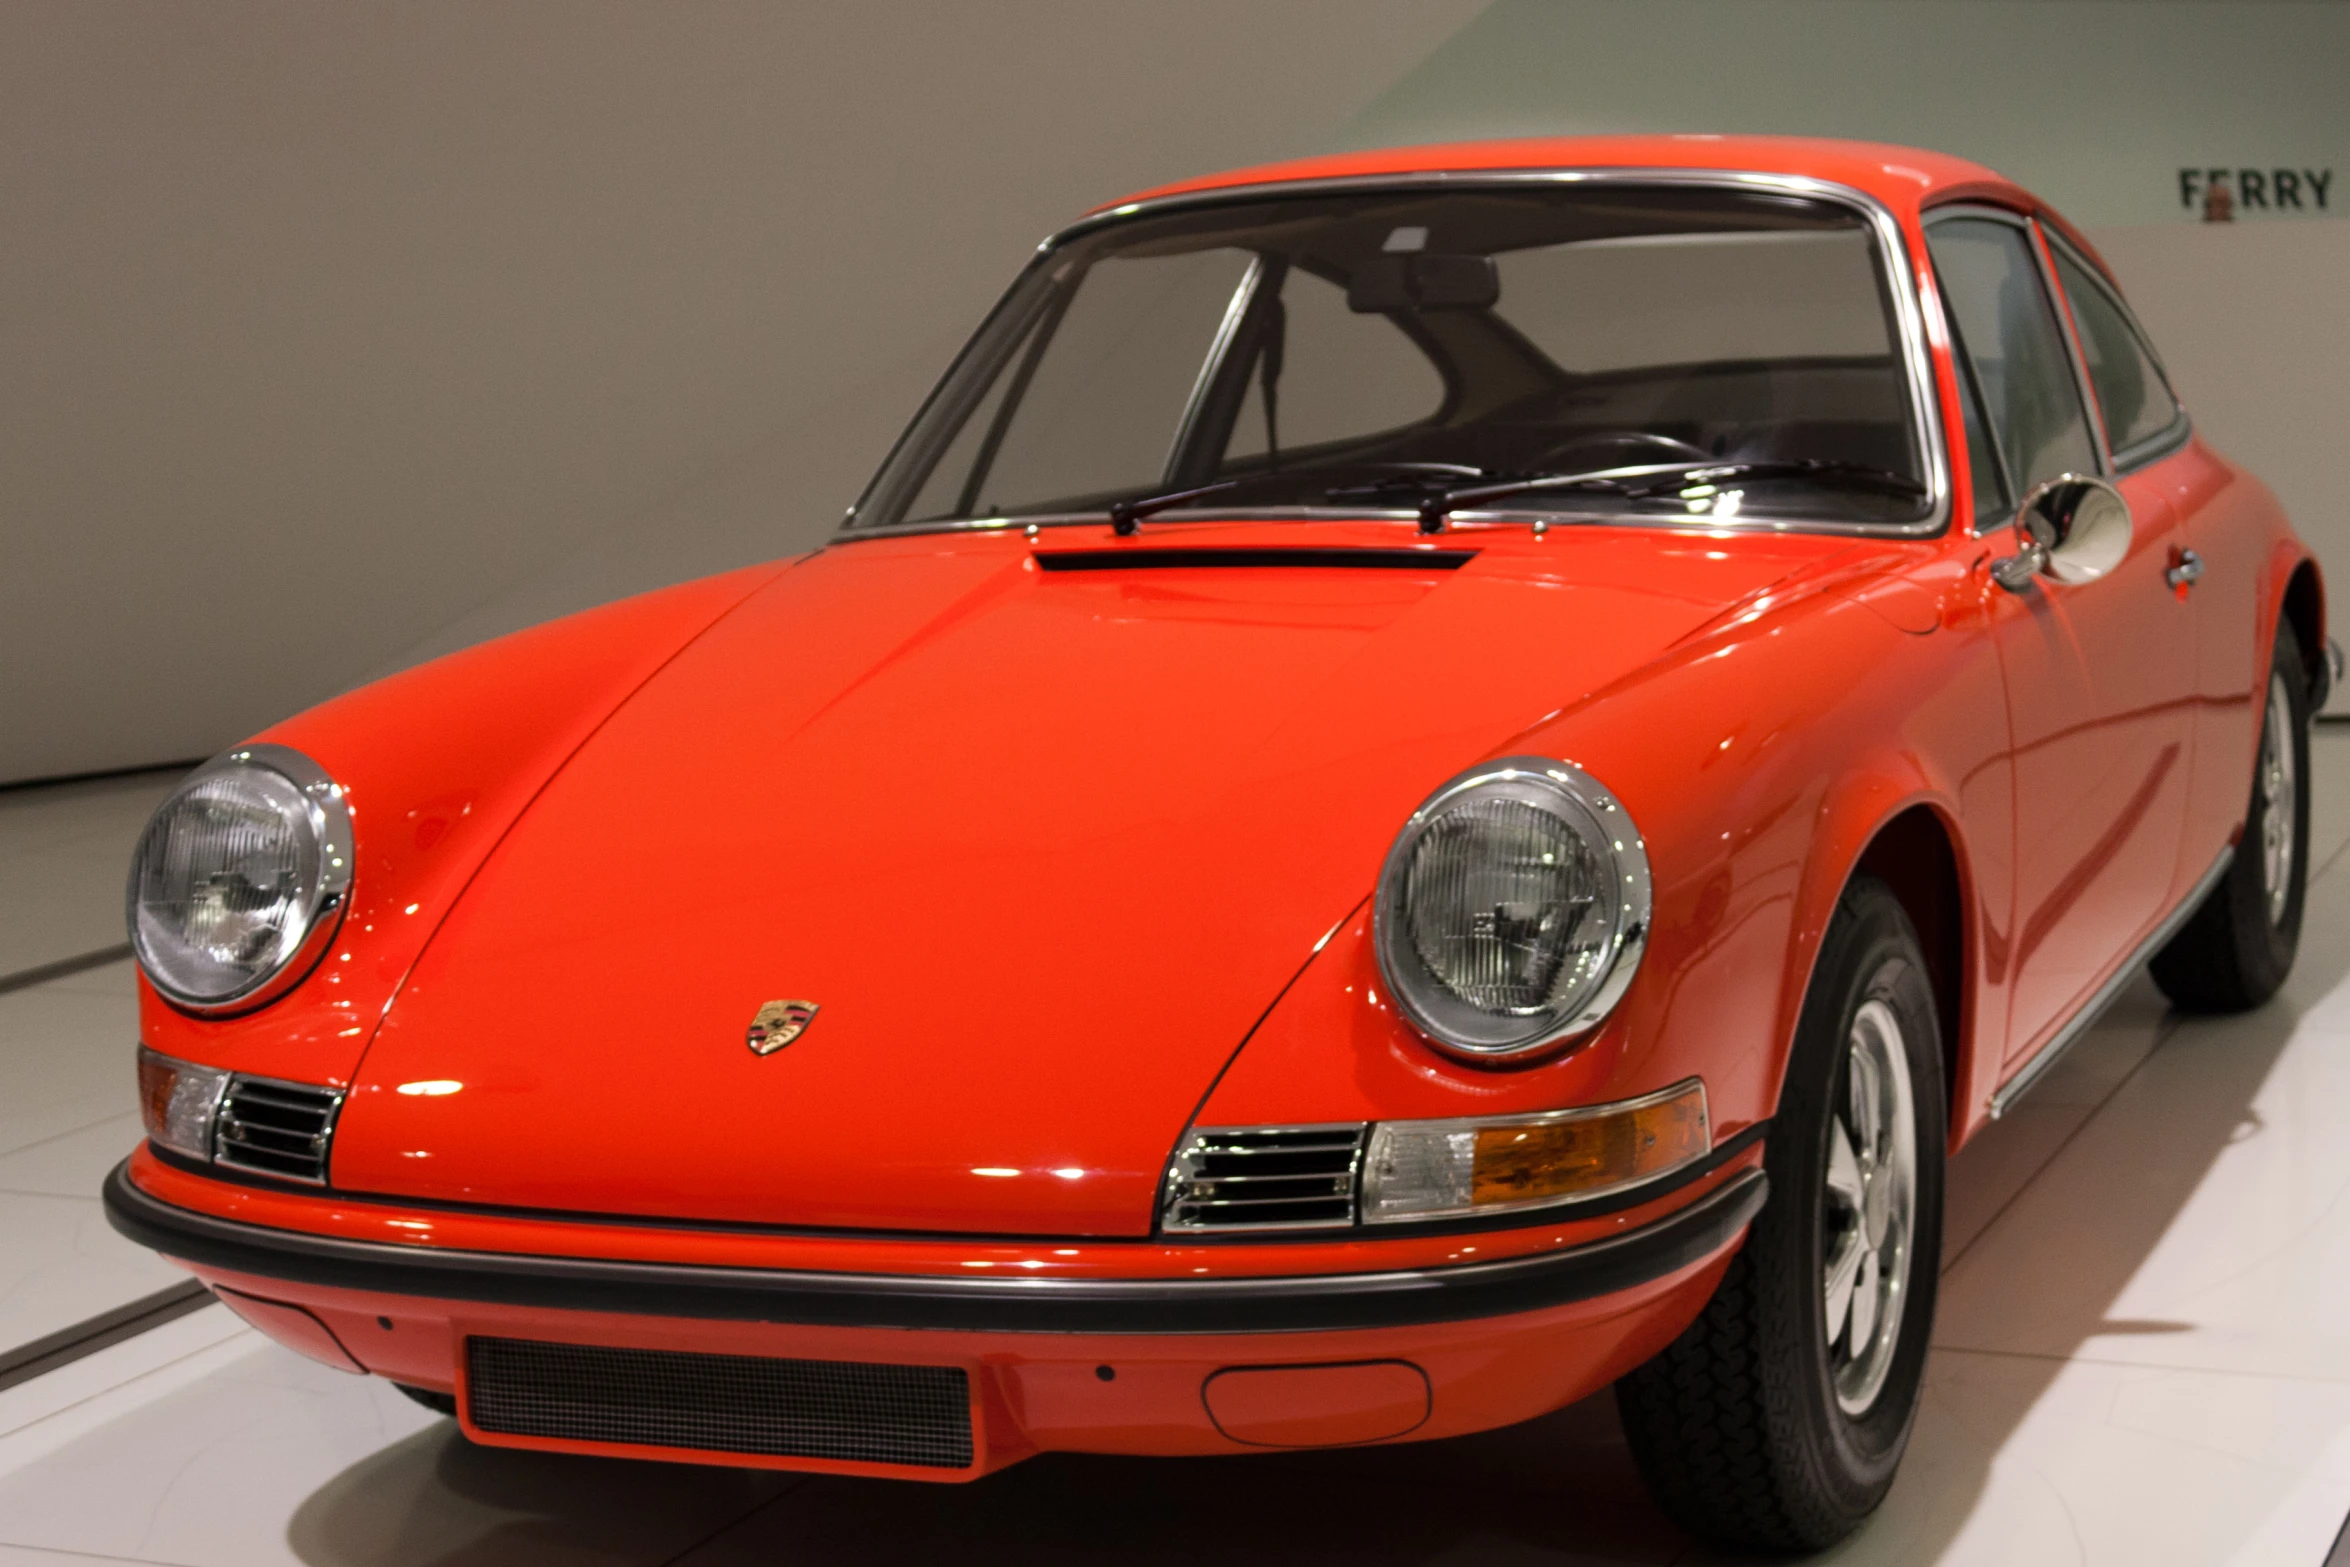 this bright orange porsche is on display in the museum